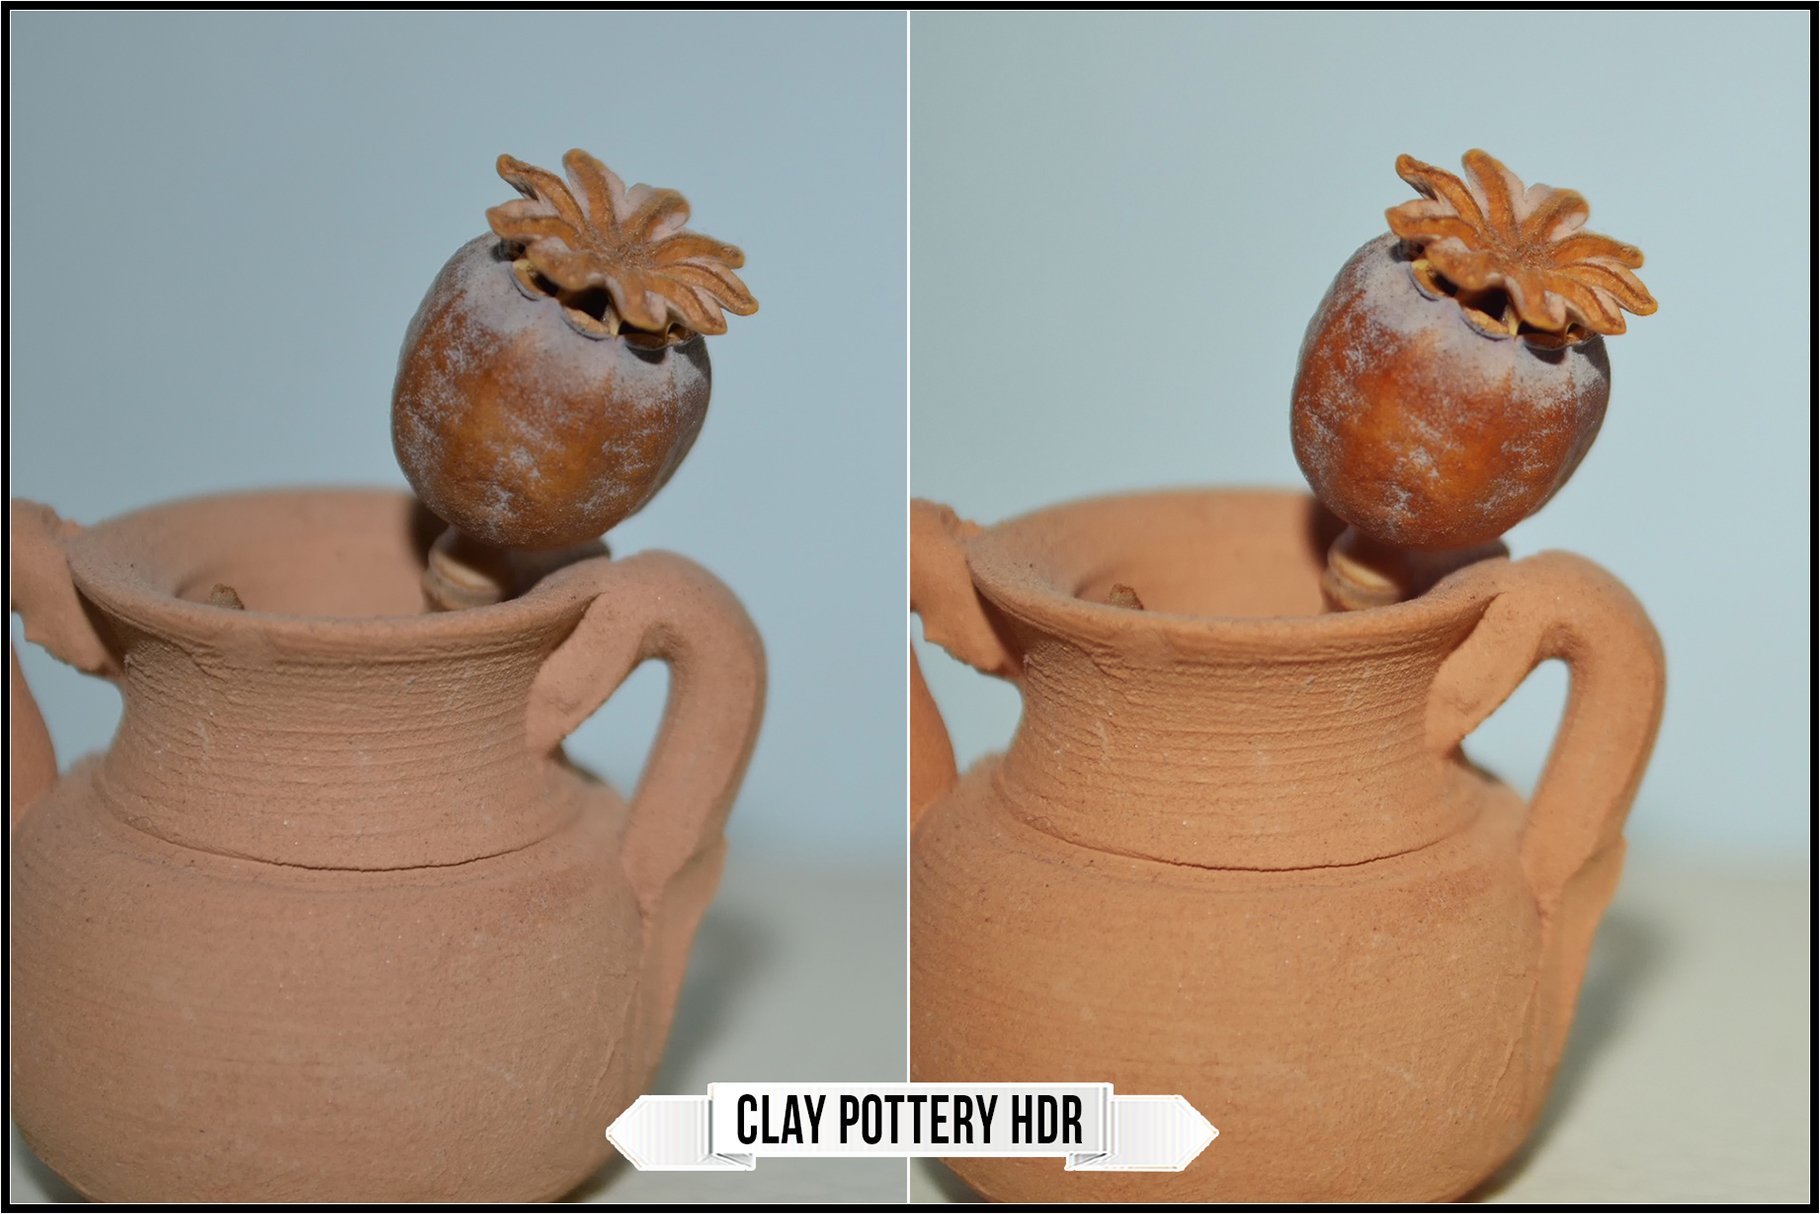 clay pottery hdr 416